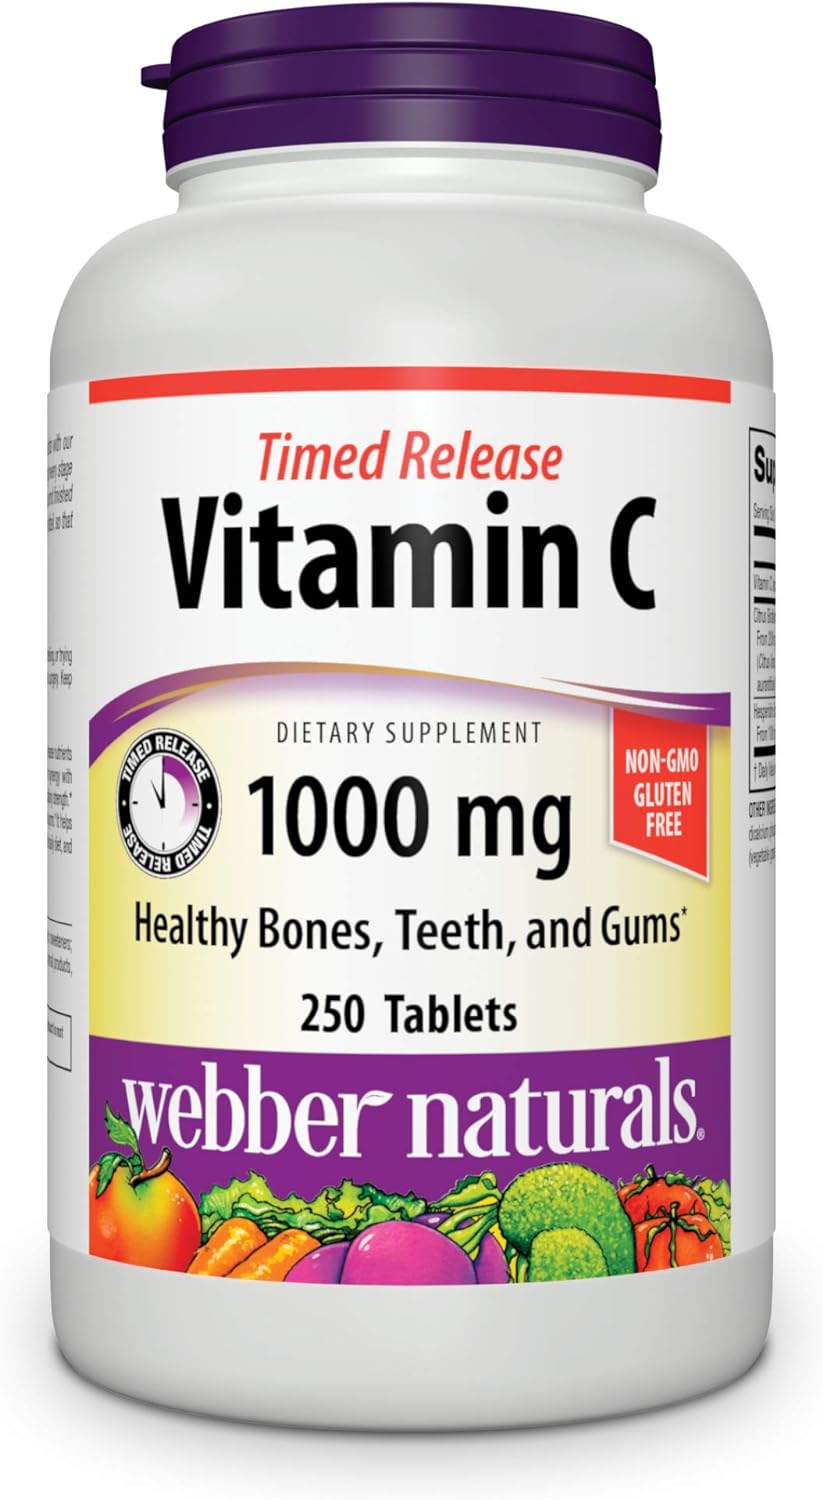 Webber Naturals Vitamin C Timed Release, 1,000 mg of Vitamin C in Each Tablet, 250 Tablets, Free of GMOs, Gluten and Diary, Suitable for Vegetarians and Vegans, for Immune and Antioxidant Support